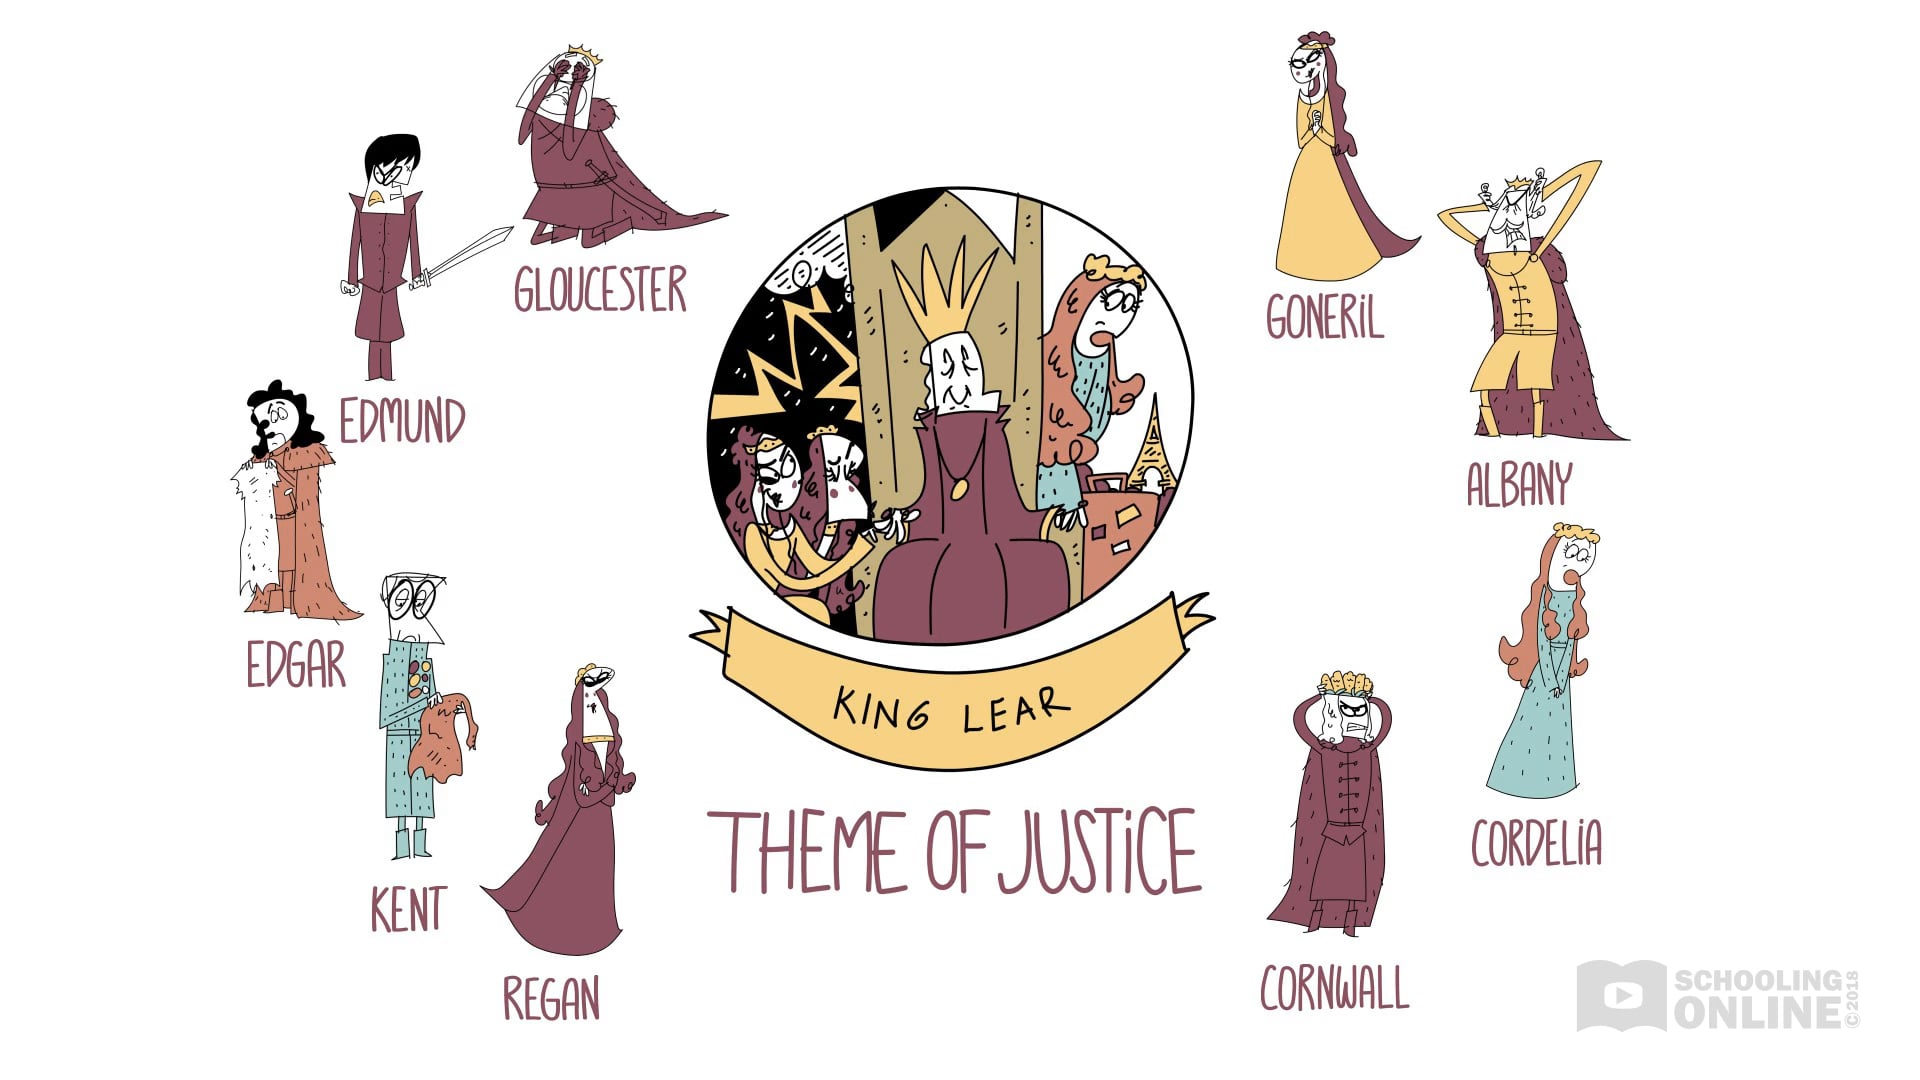 The Theme of Justice in King Lear